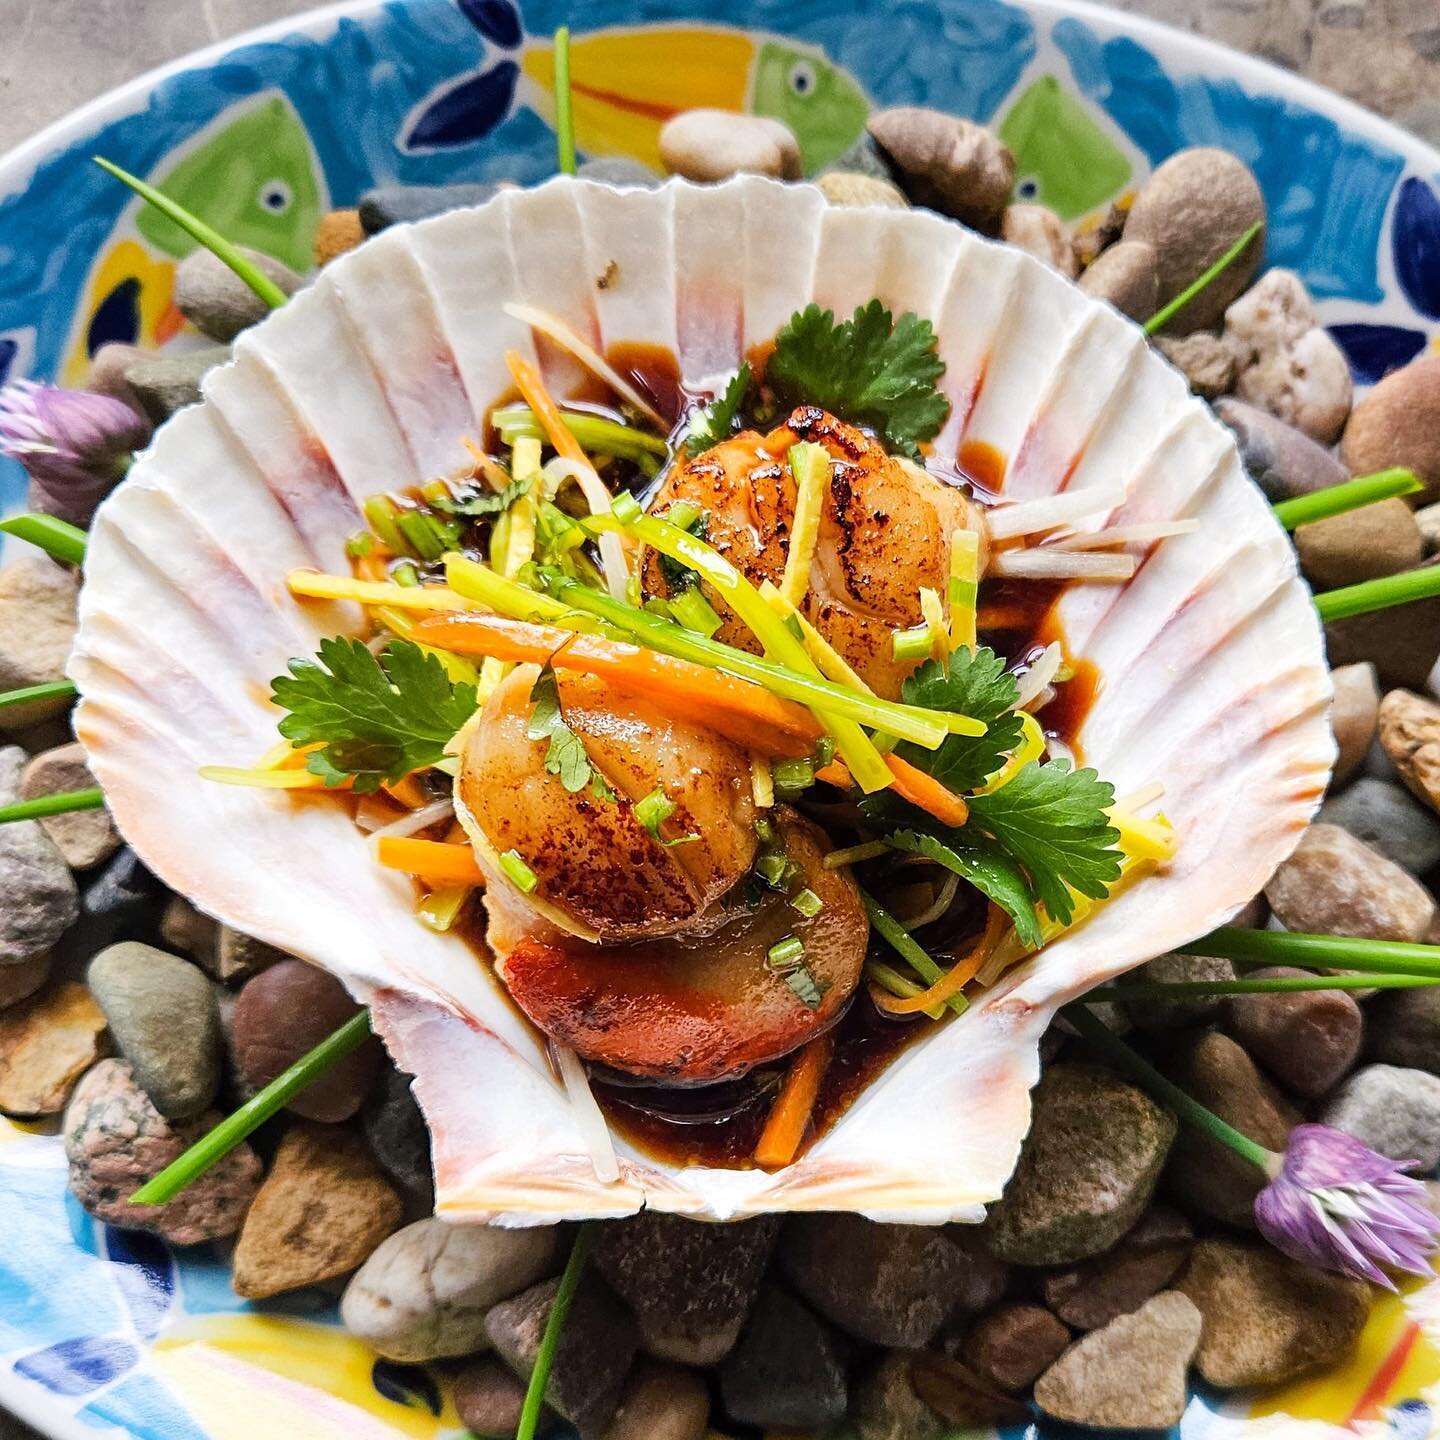 RECIPE 📢 Scallop Cooked in Shell 
Try the recipe &amp; take on the challenge...

The wonderful @stevendoherty6 has provided the starter recipe for our Scottish Highland Chef Competition in September.

Are you up for the challenge? find out more abou